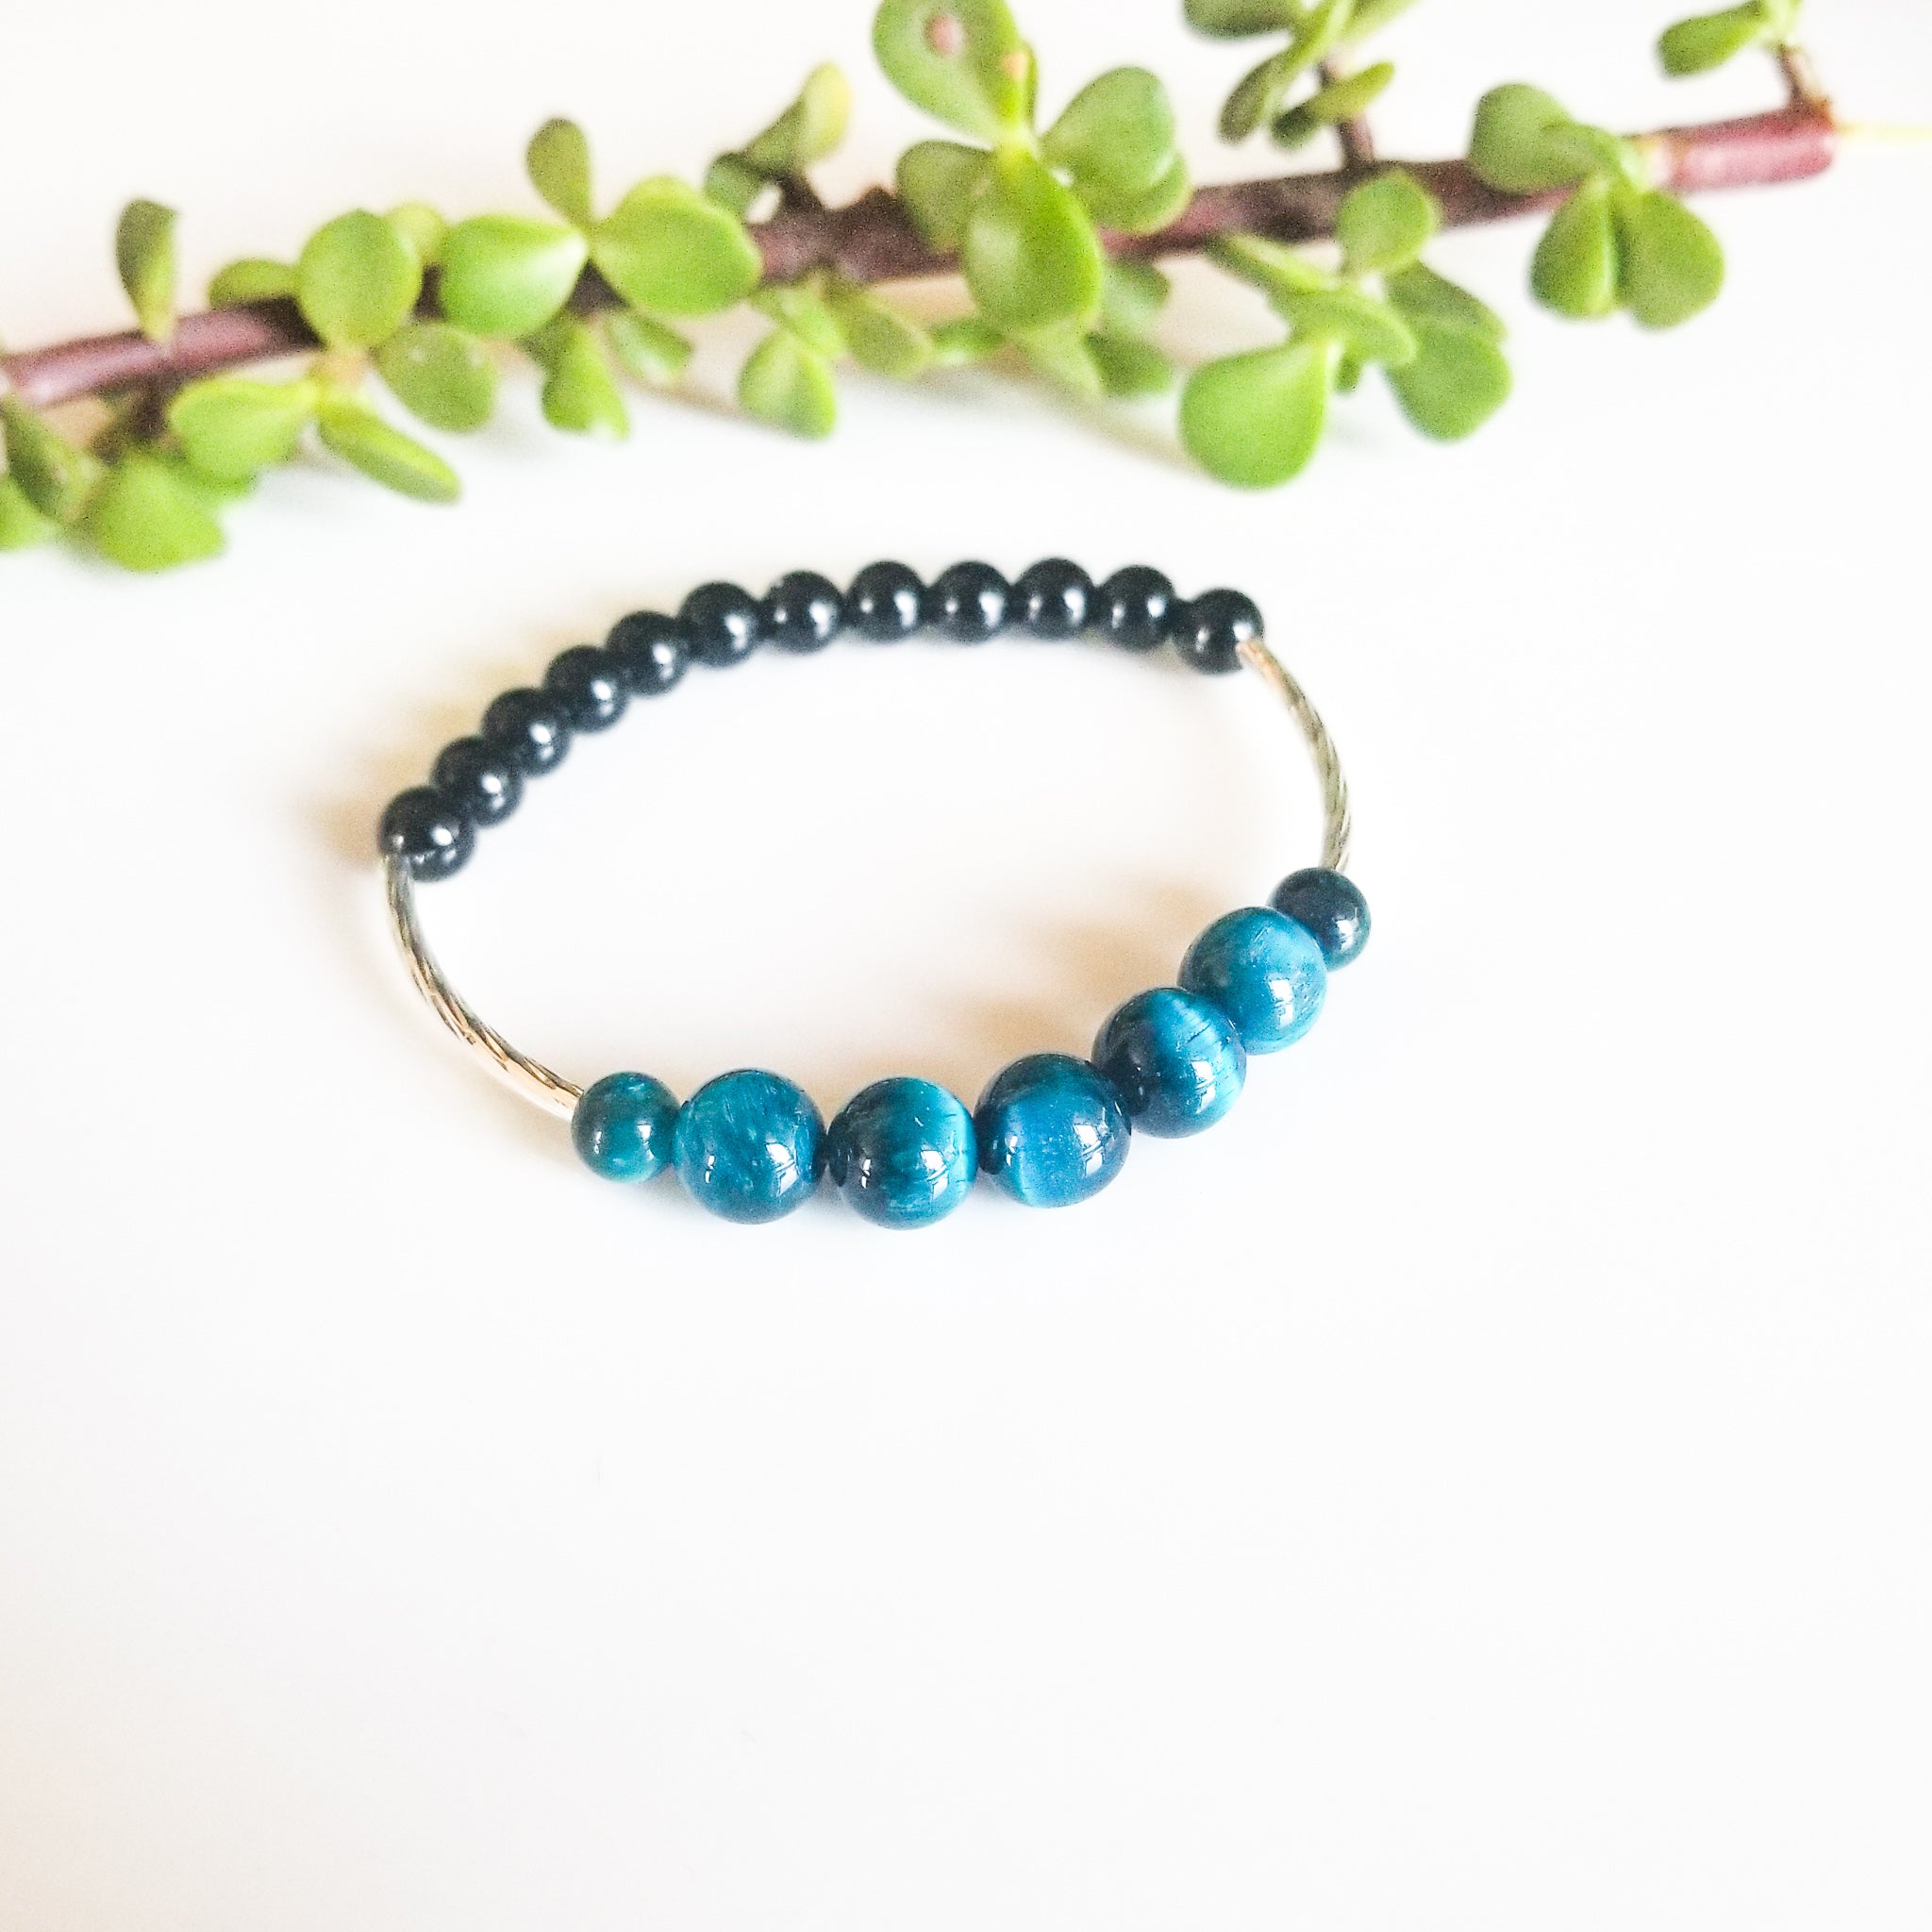 Laguna Collection - Soothing Blue Tiger Eye Bracelet with Silver Accents shown up close - BellaChel Jeweler